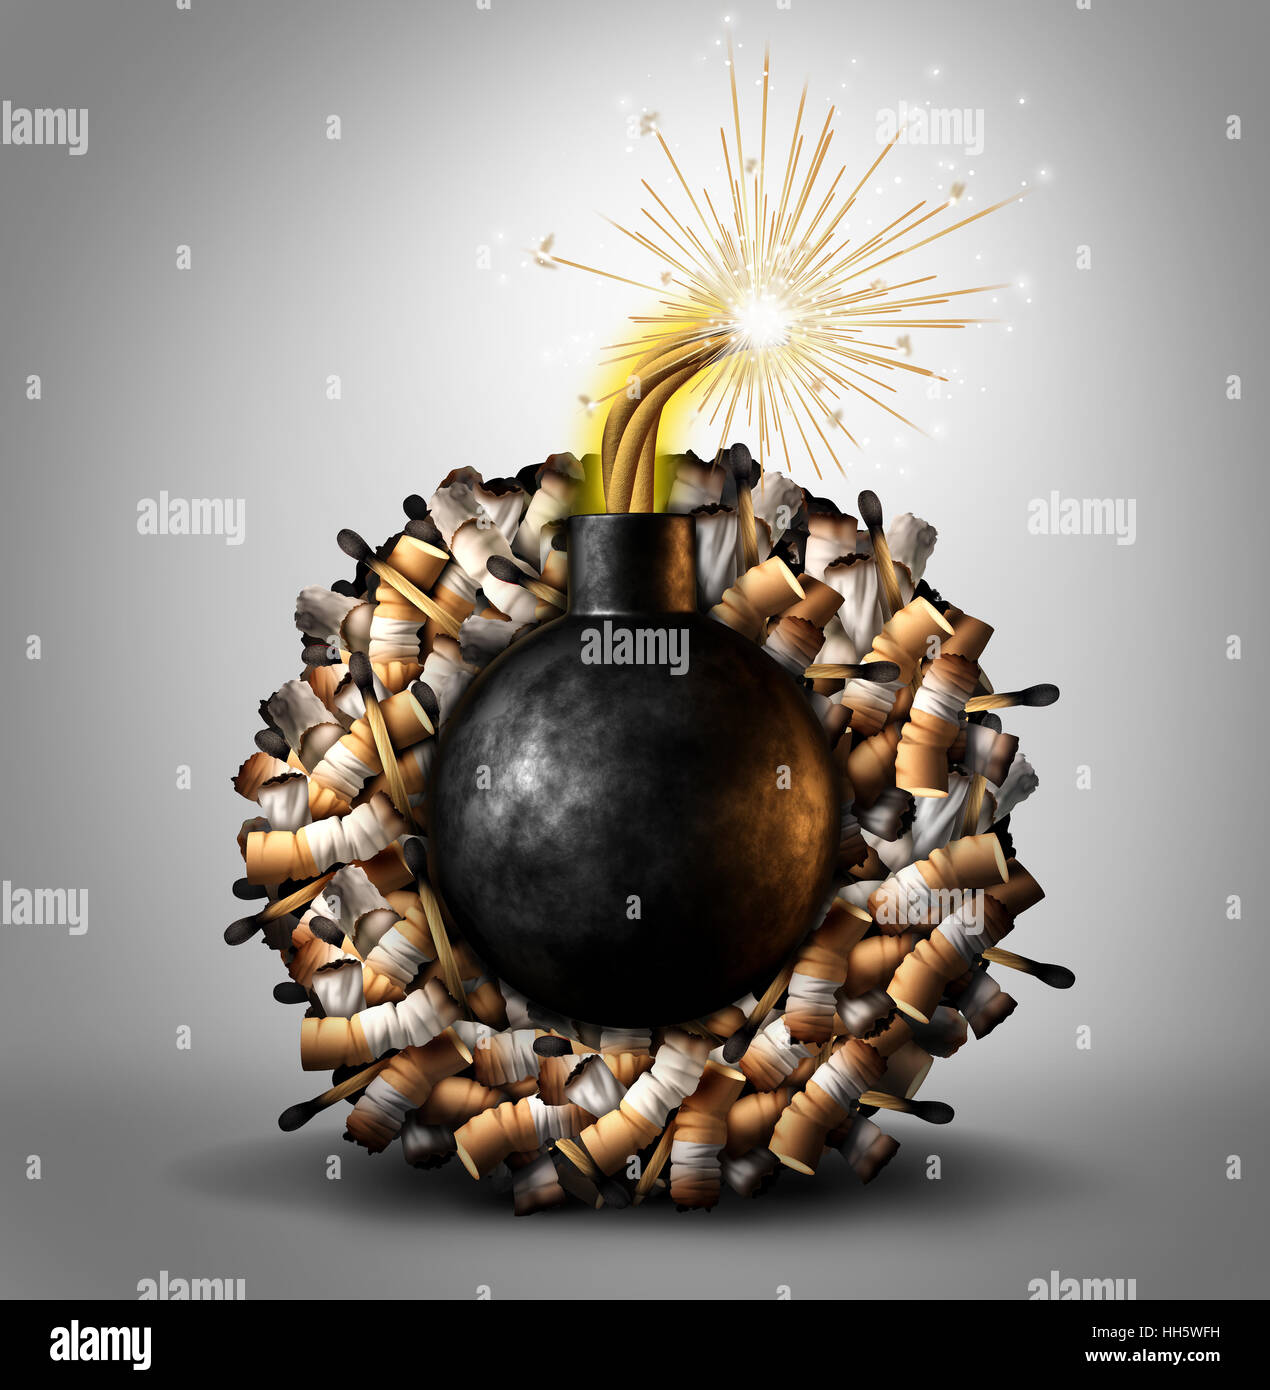 Smoking time bomb danger concept as a group of cigarette and matches burning with a lit explosive inside as a metaphor causing lung cancer and lethal Stock Photo